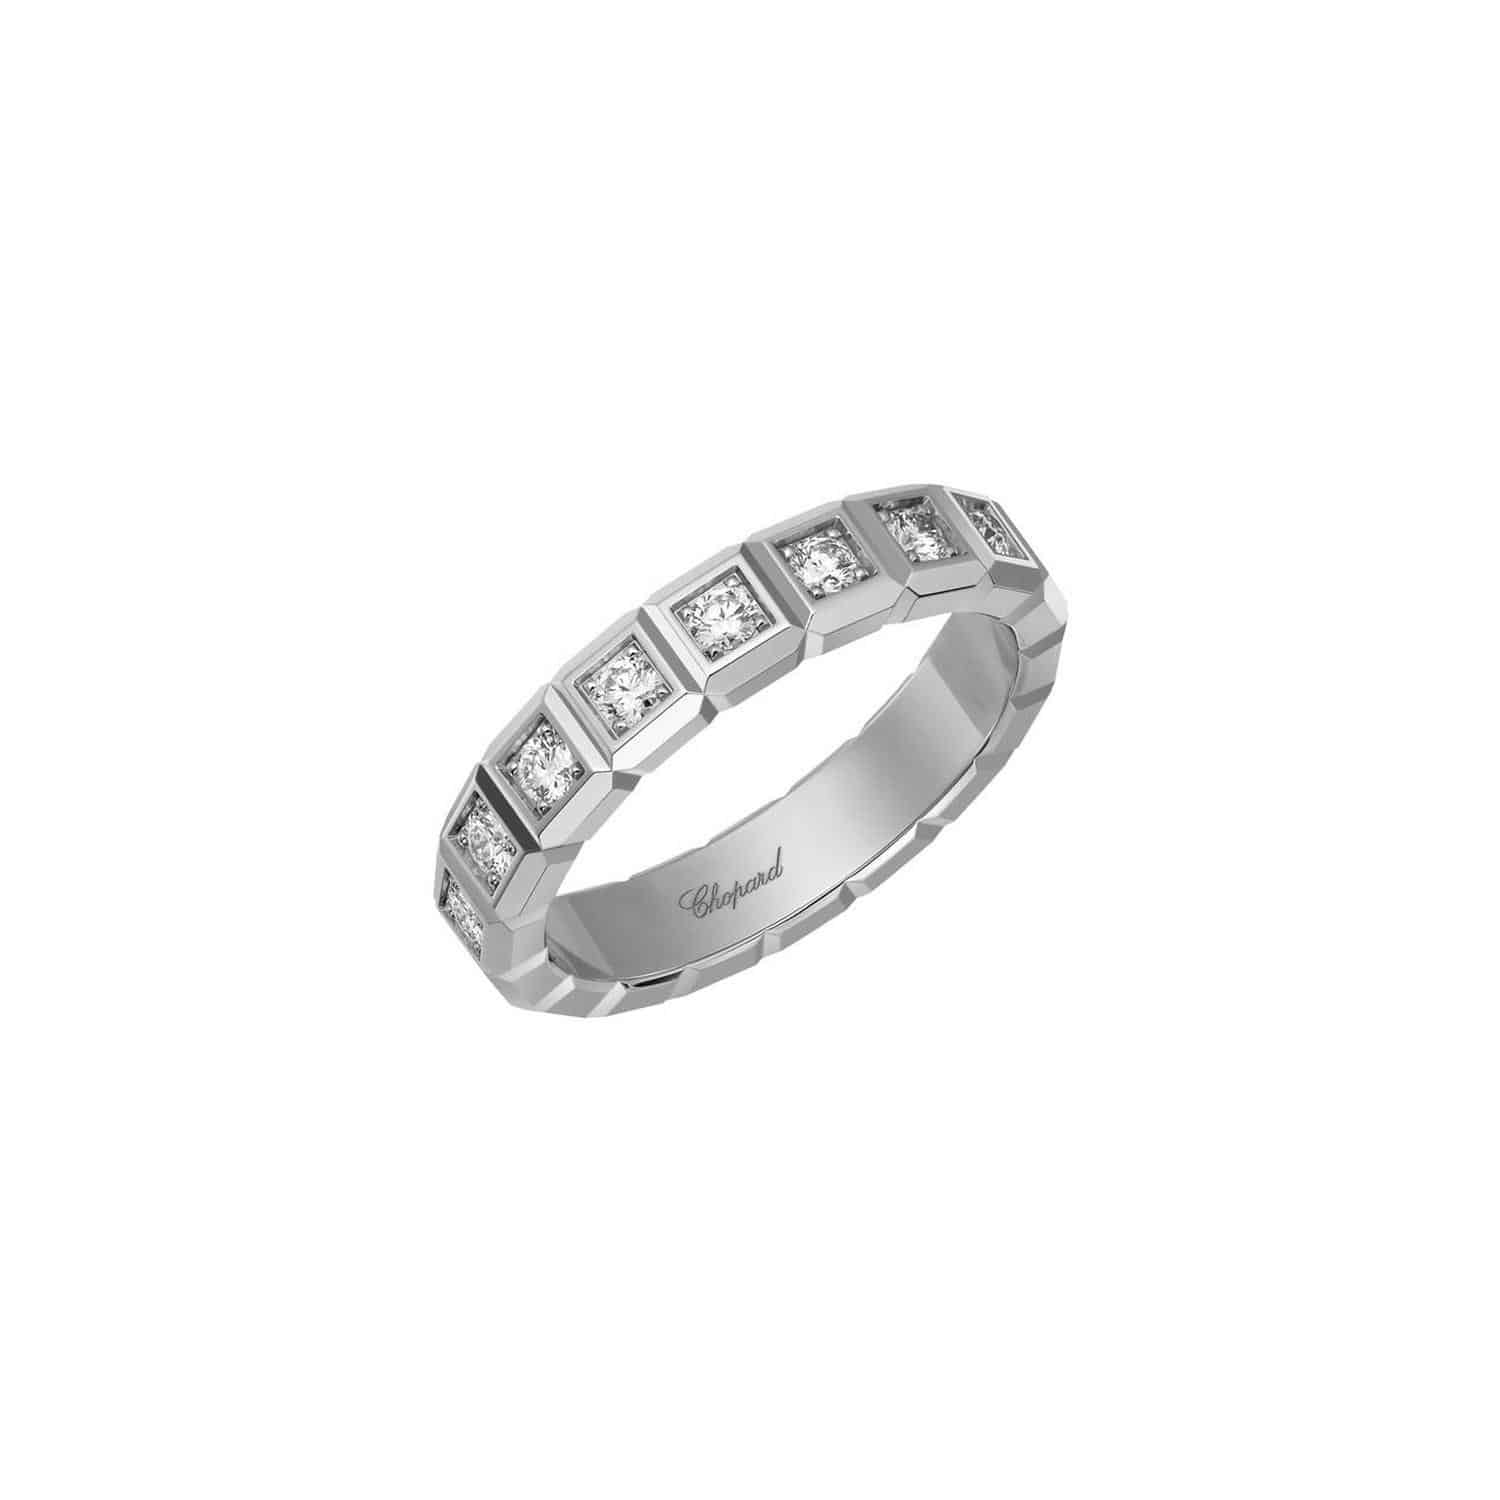 CHOPARD RING ICE CUBE - 829834-1041